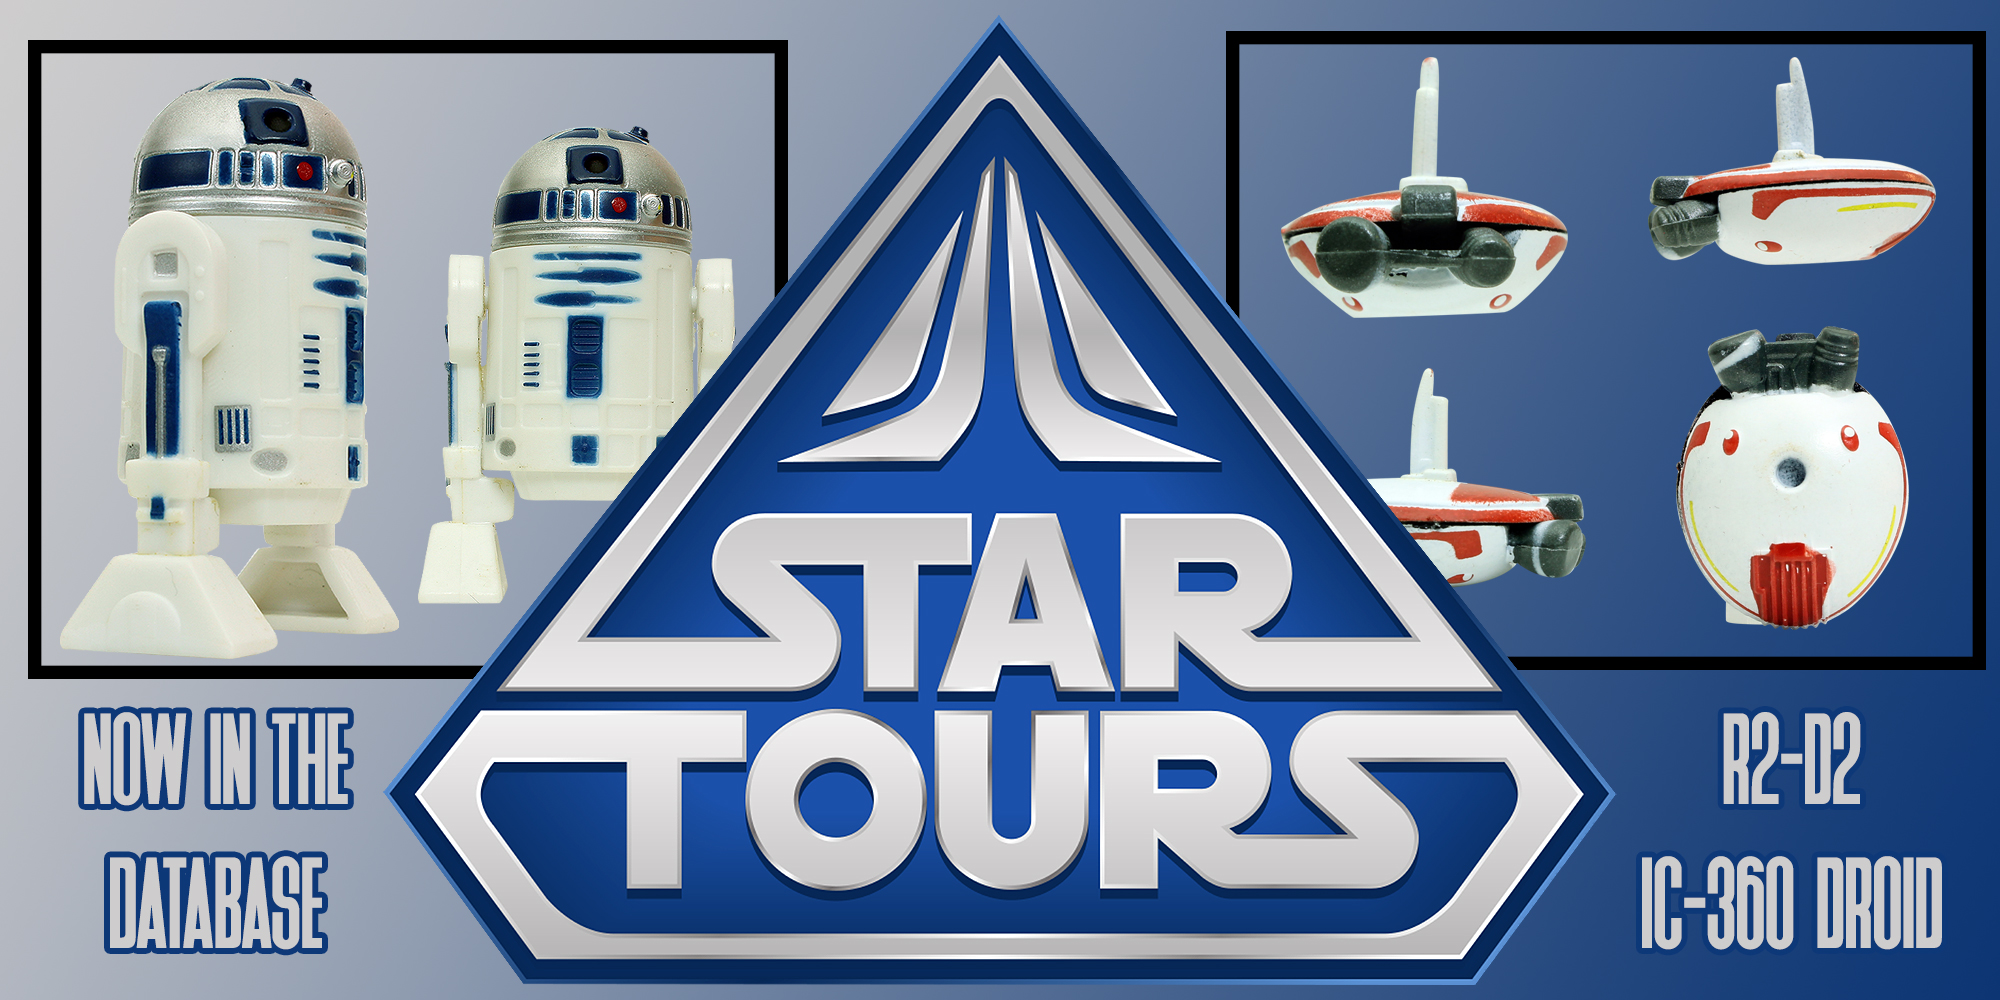 New Additions: Star Tours R2-D2 And IC-360 Cam Droid